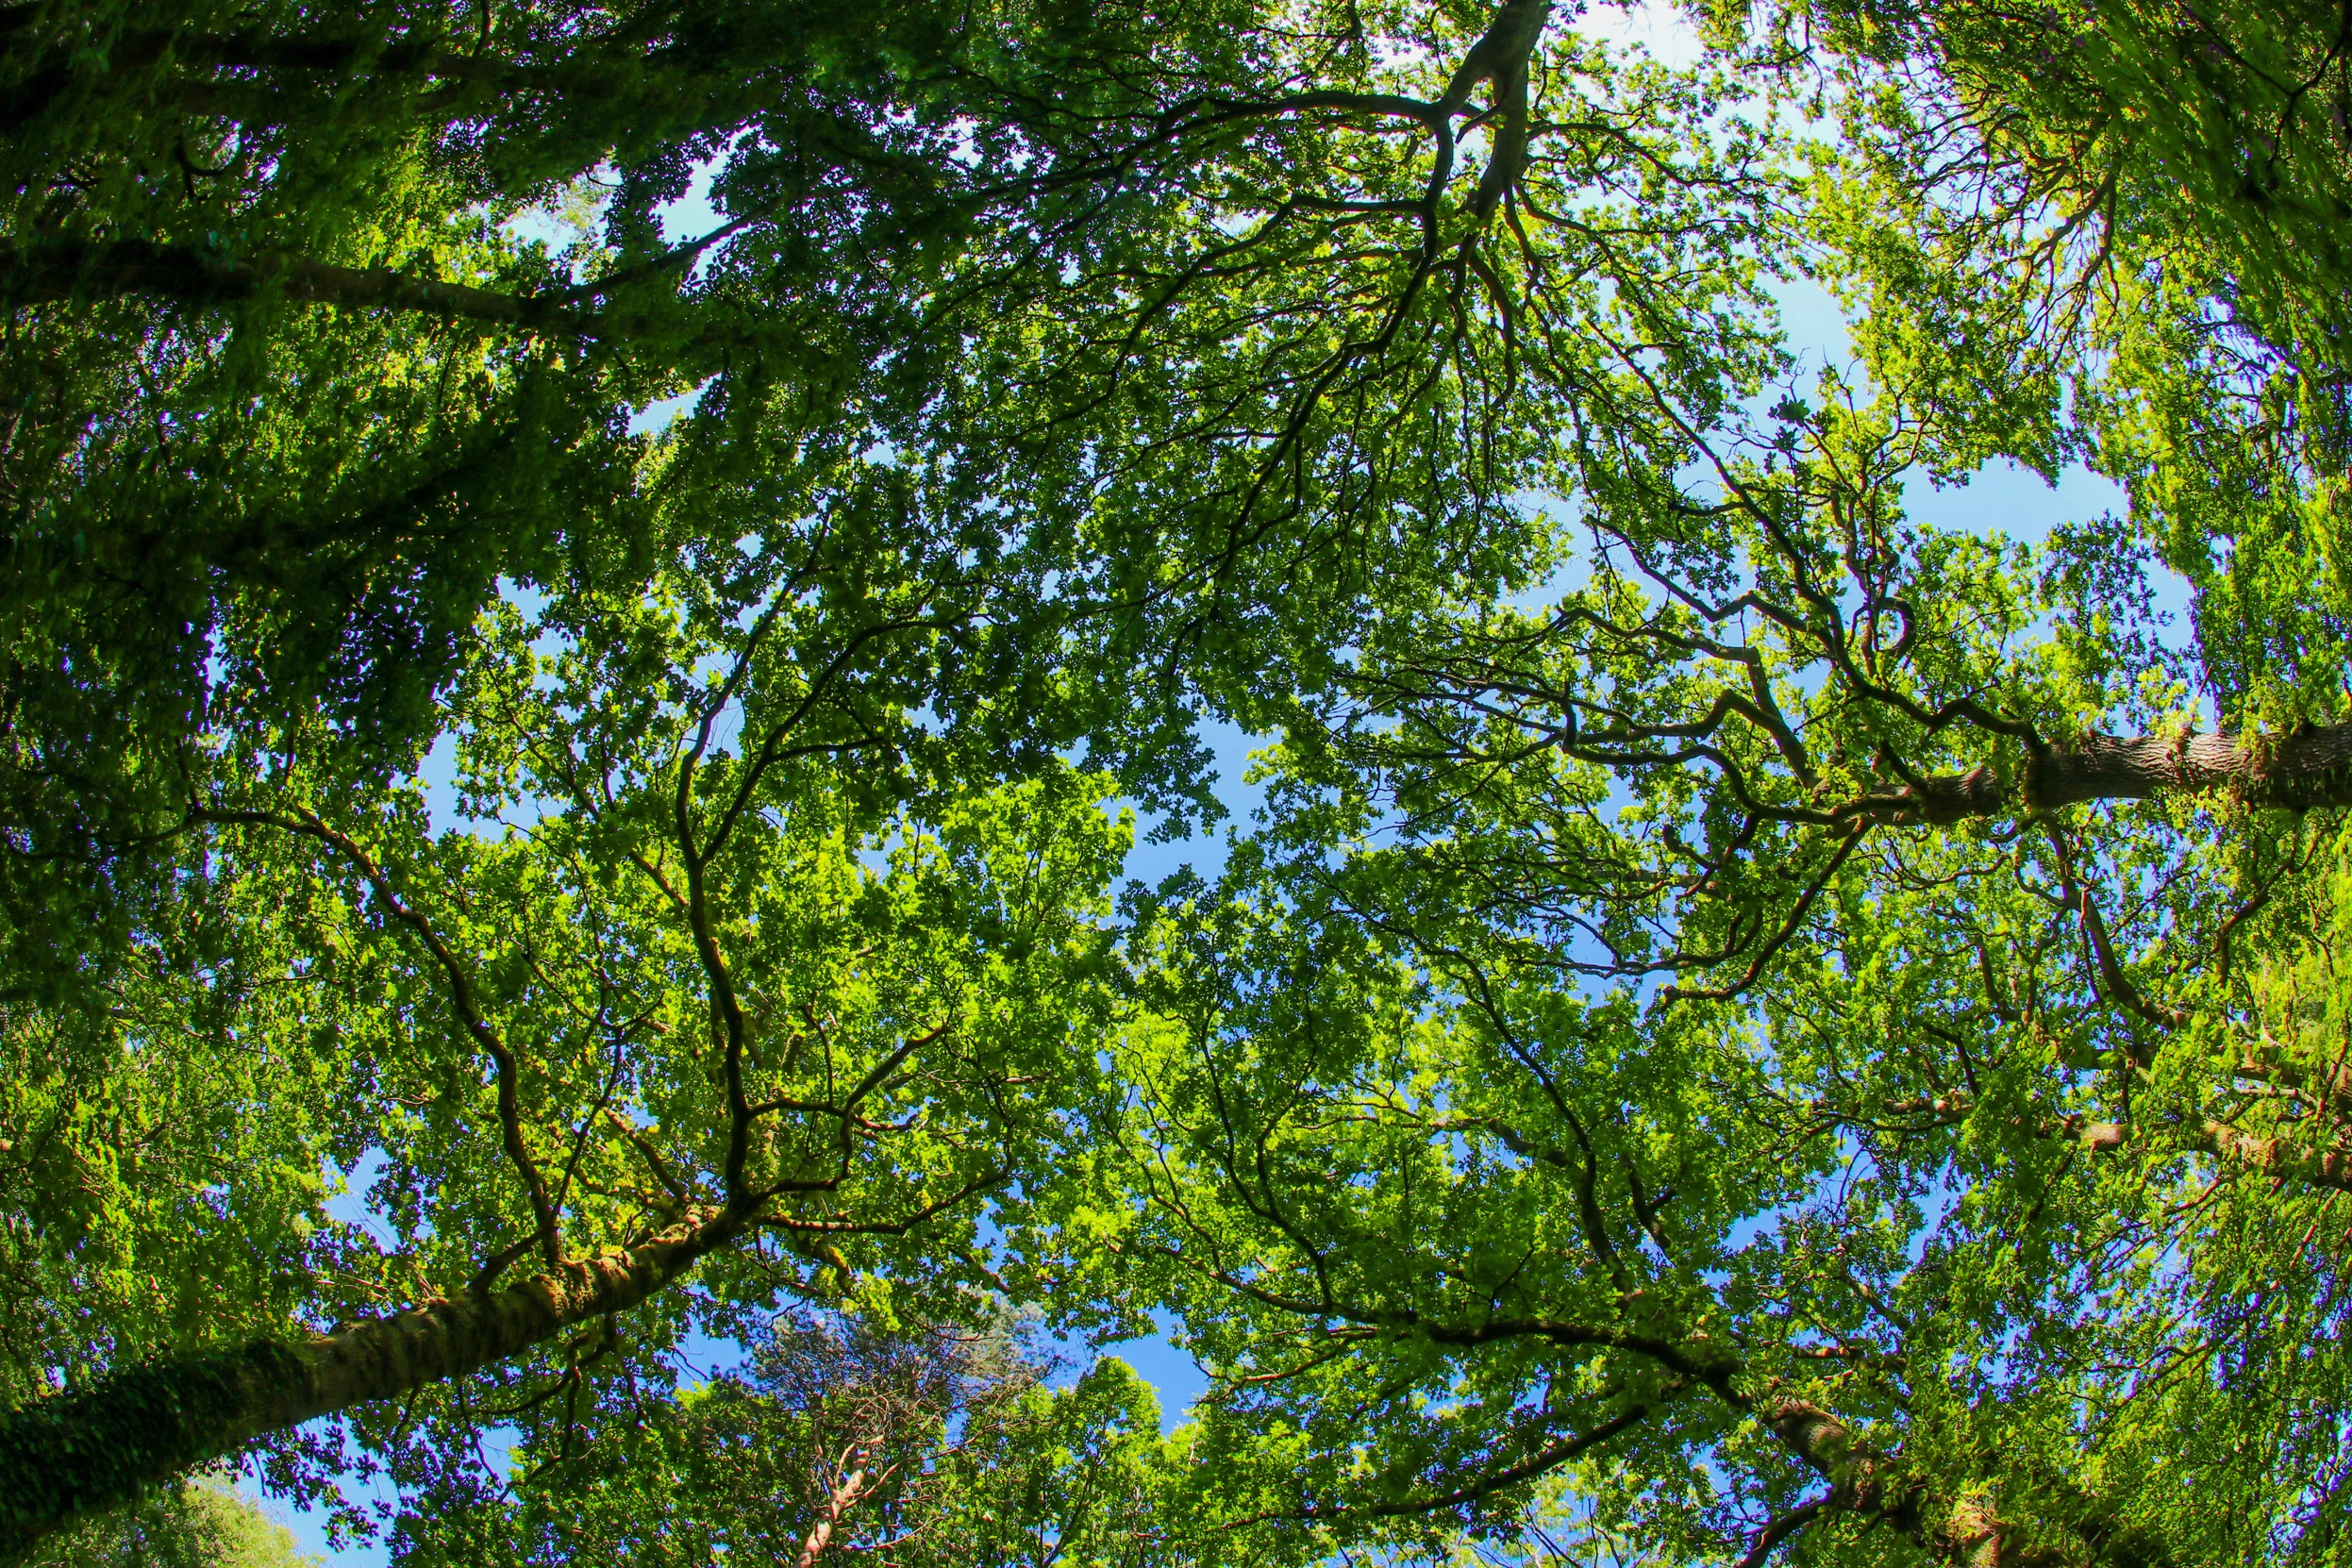 The view of an ancient woodland looking upwards towards the leafy green tree tops.